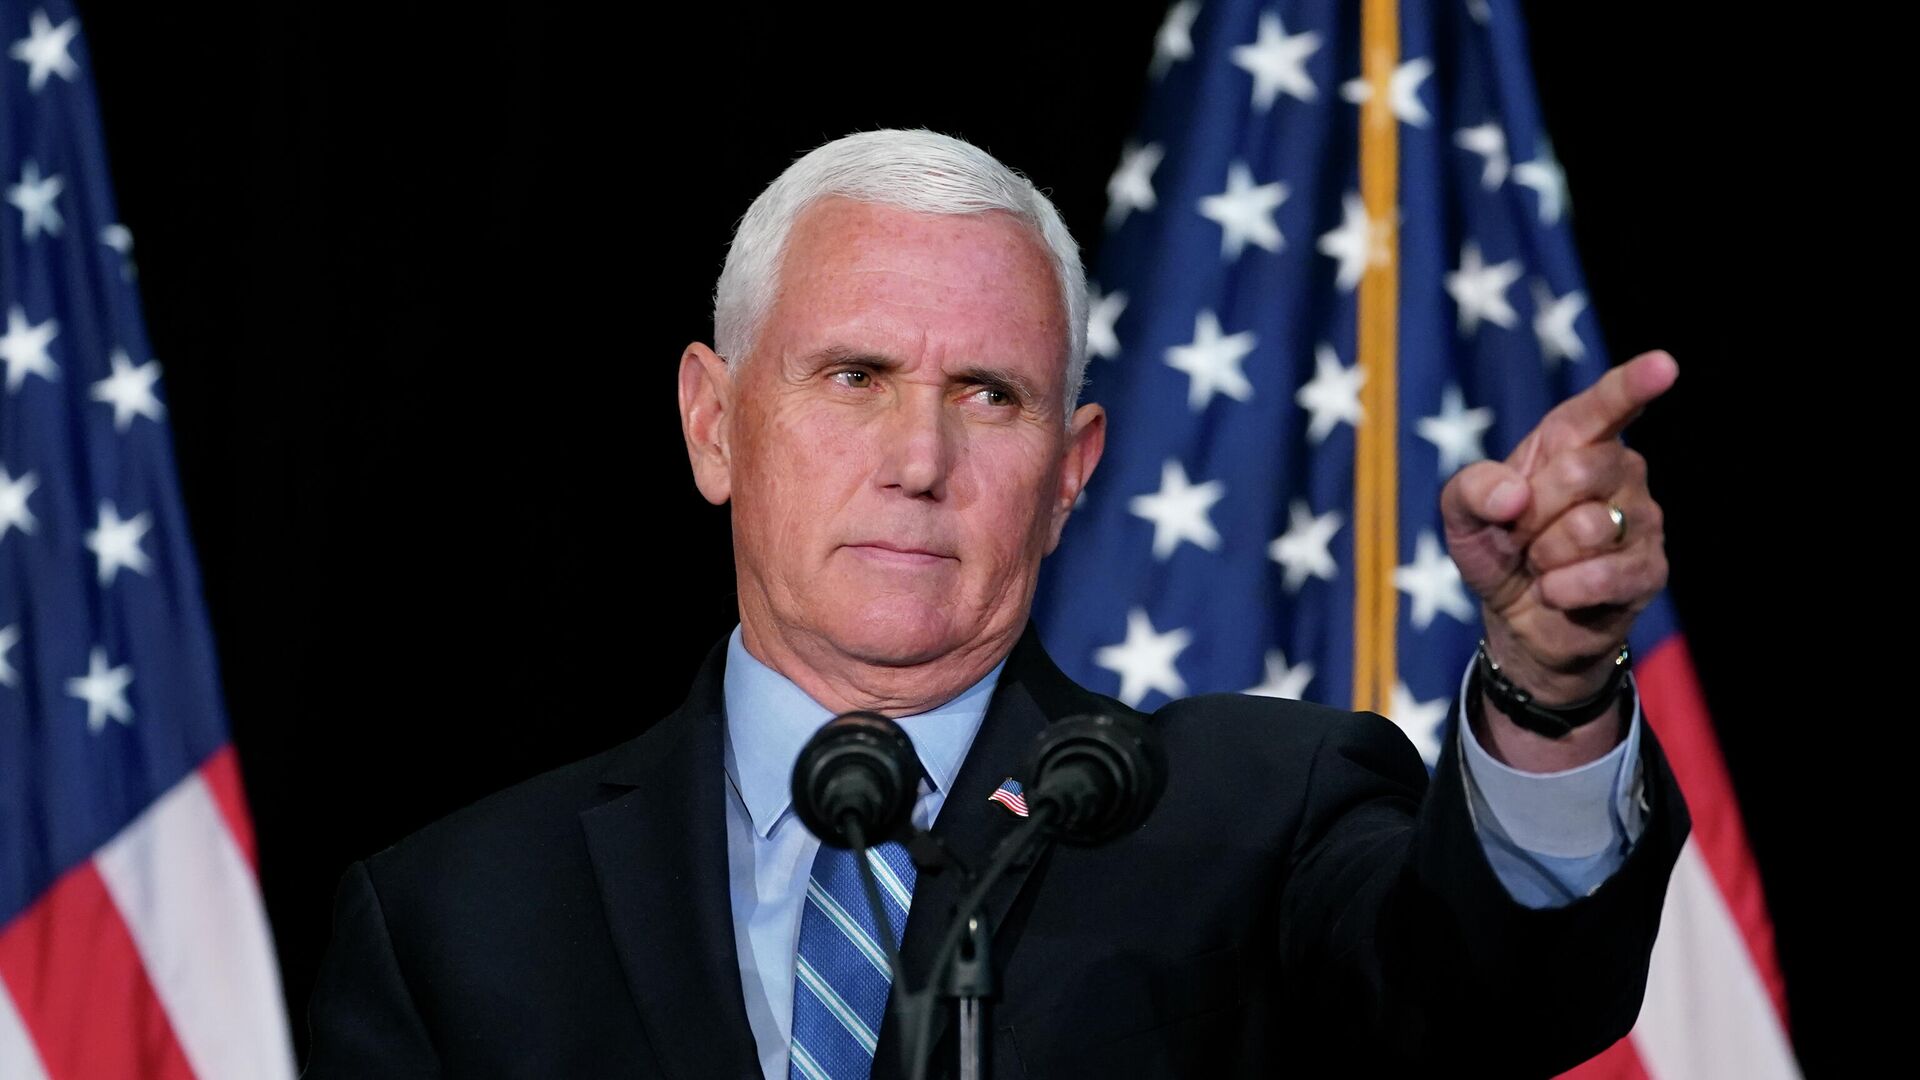 Former Vice President Mike Pence speaks about educational freedom at Patrick Henry College in Purcellville, Va., Thursday, Oct. 28, 2021. - Sputnik International, 1920, 29.03.2023